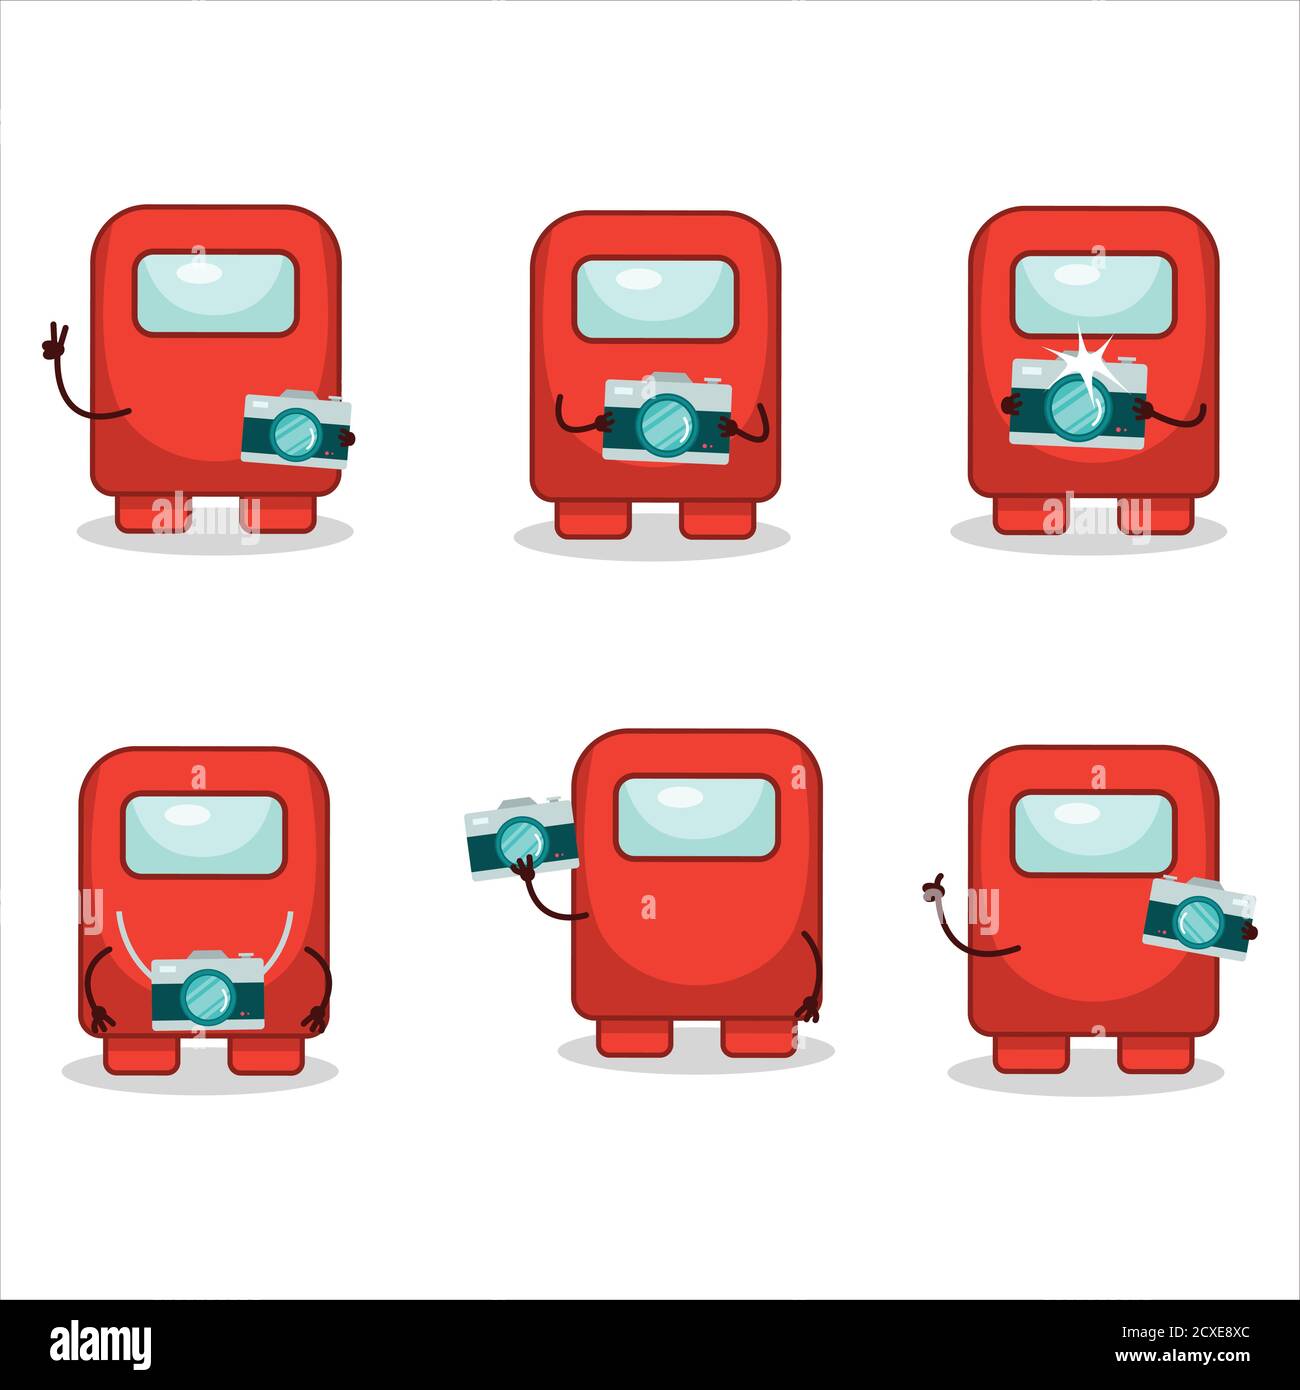 Photographer profession emoticon with among us red cartoon character Stock Vector